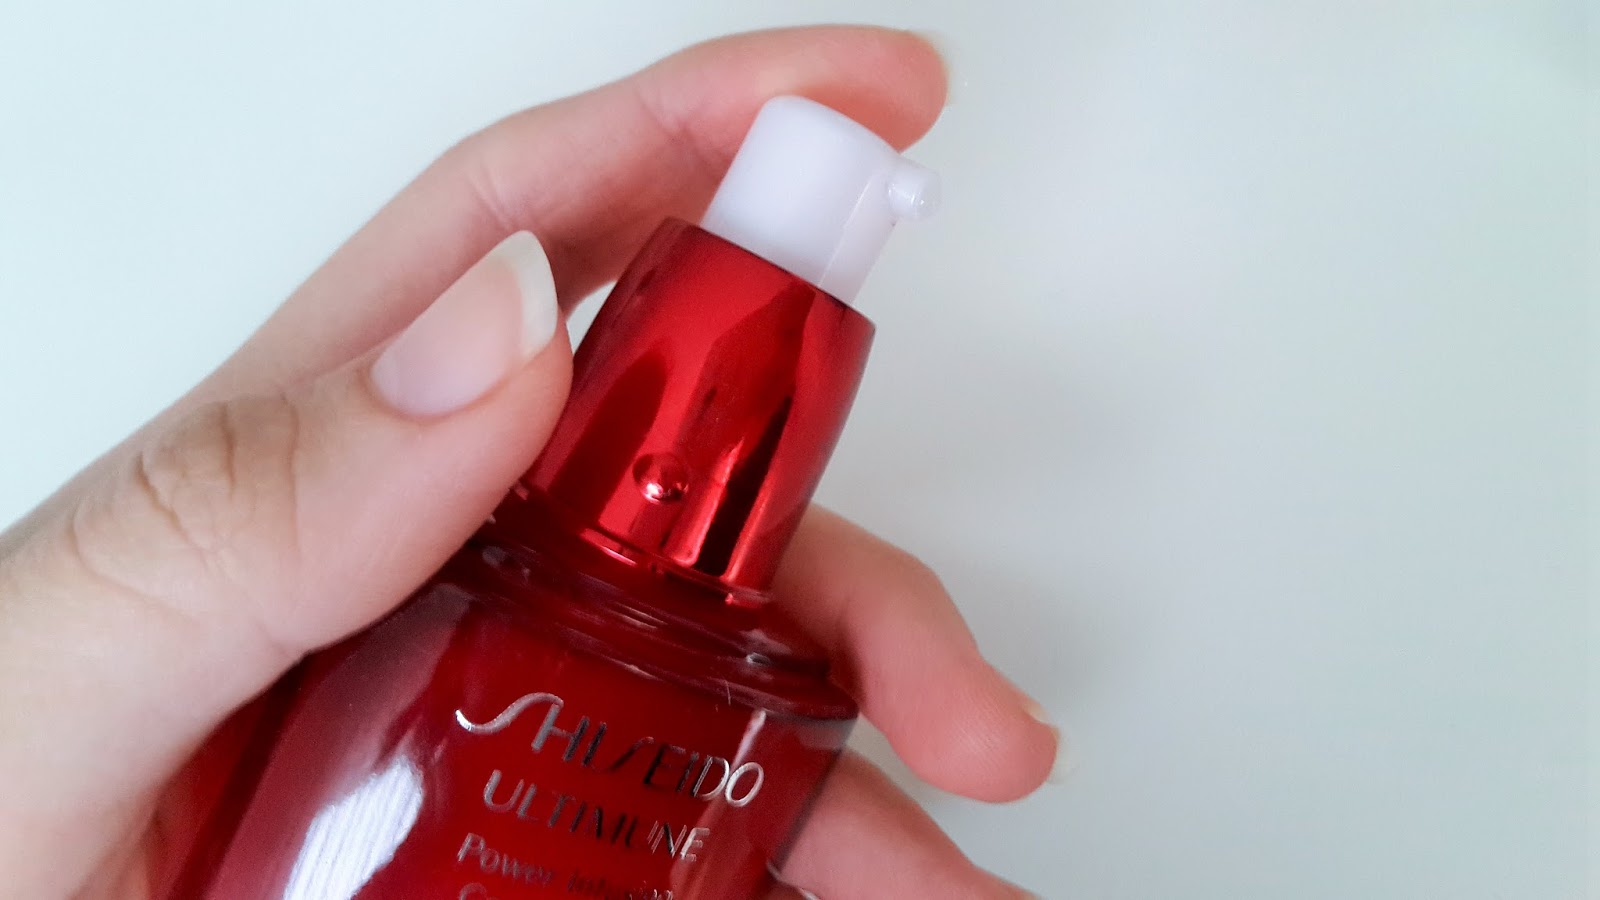 Shiseido ultimune power infusing concentrate. Shiseido Ultimate Power infusing Concentrate. Ultimune концентрат шисейдо Power infusing. Концентрат для лица Shiseido Ultimune. Shiseido Ultimune Power infusing Eye Concentrate n cjcnfd.